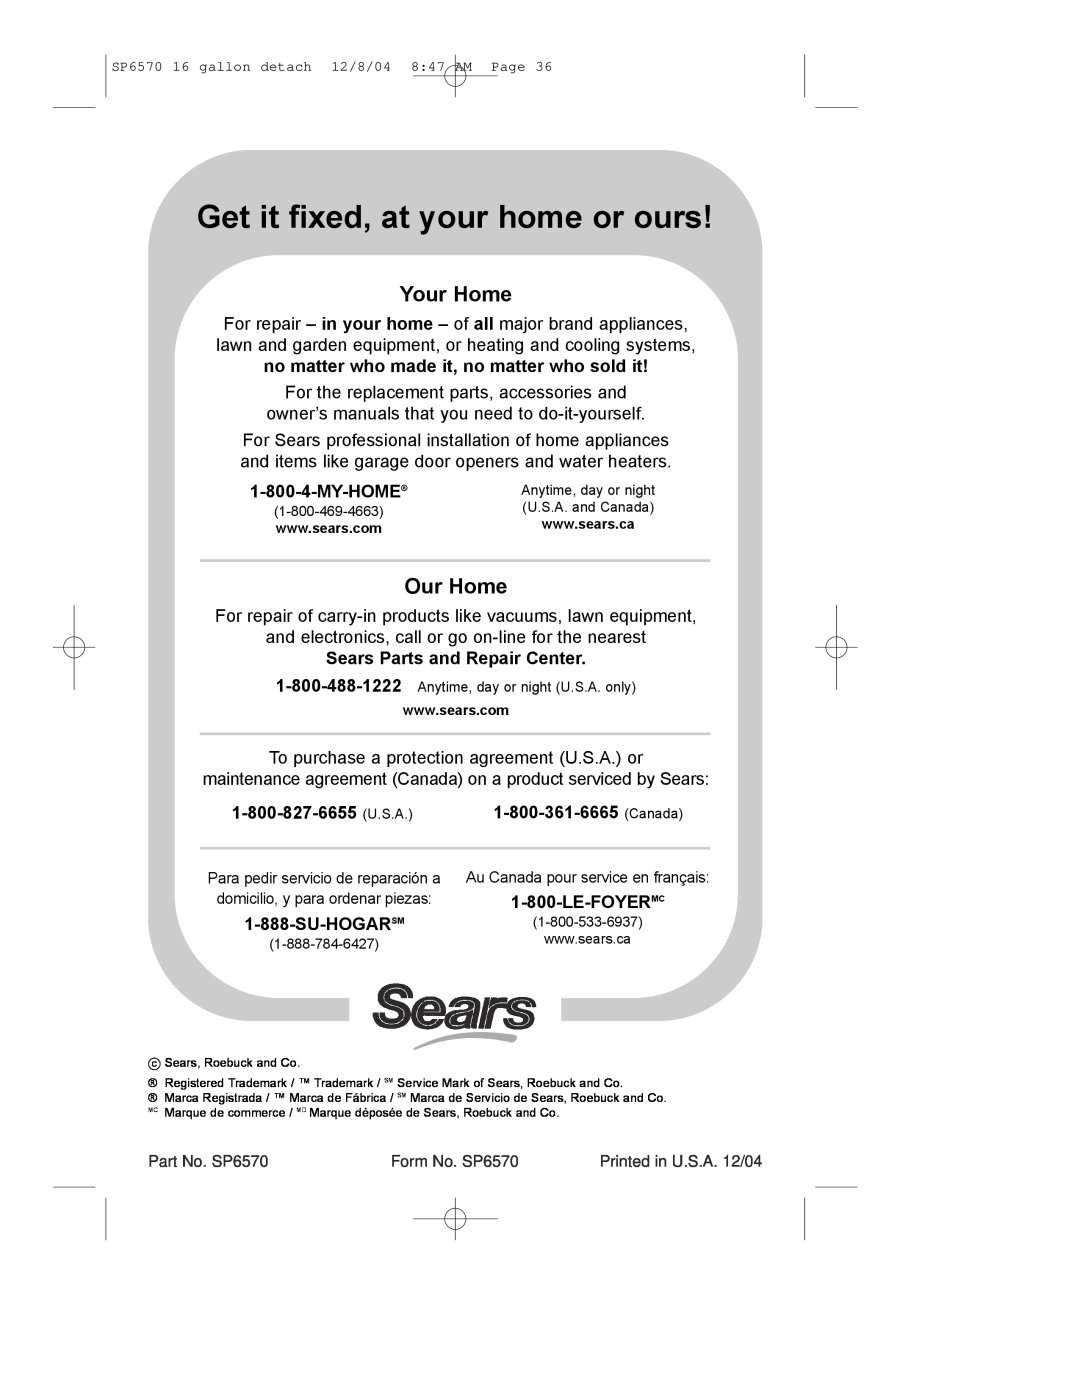 Sears 113.17066 Get it fixed, at your home or ours, Your Home, Our Home, My-Home ¨, Sears Parts and Repair Center 